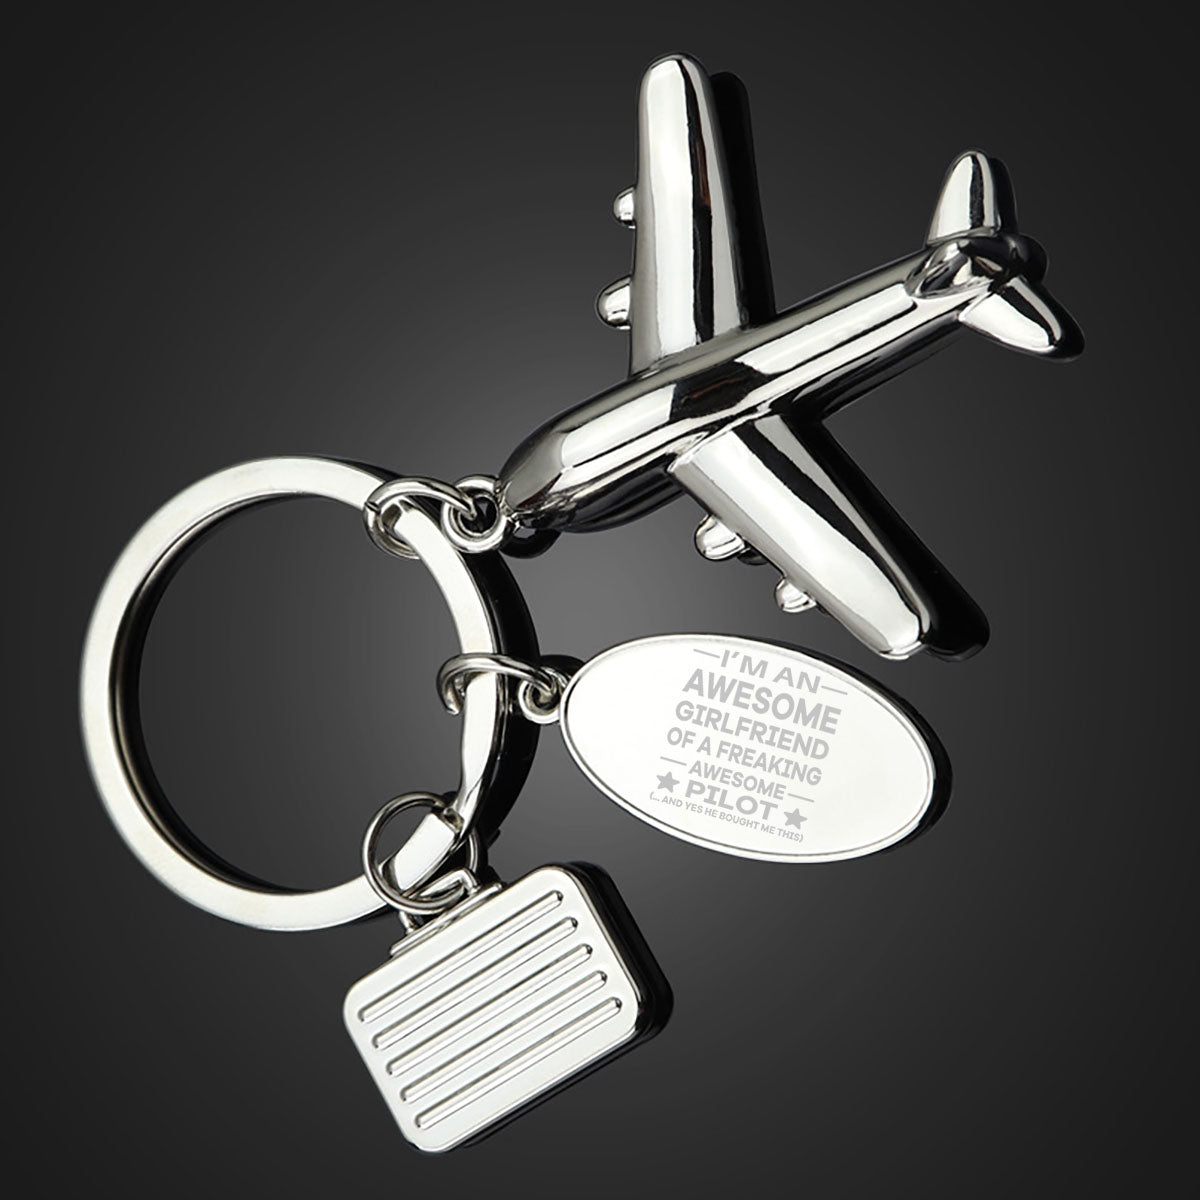 I am an Awesome Girlfriend Designed Suitcase Airplane Key Chains